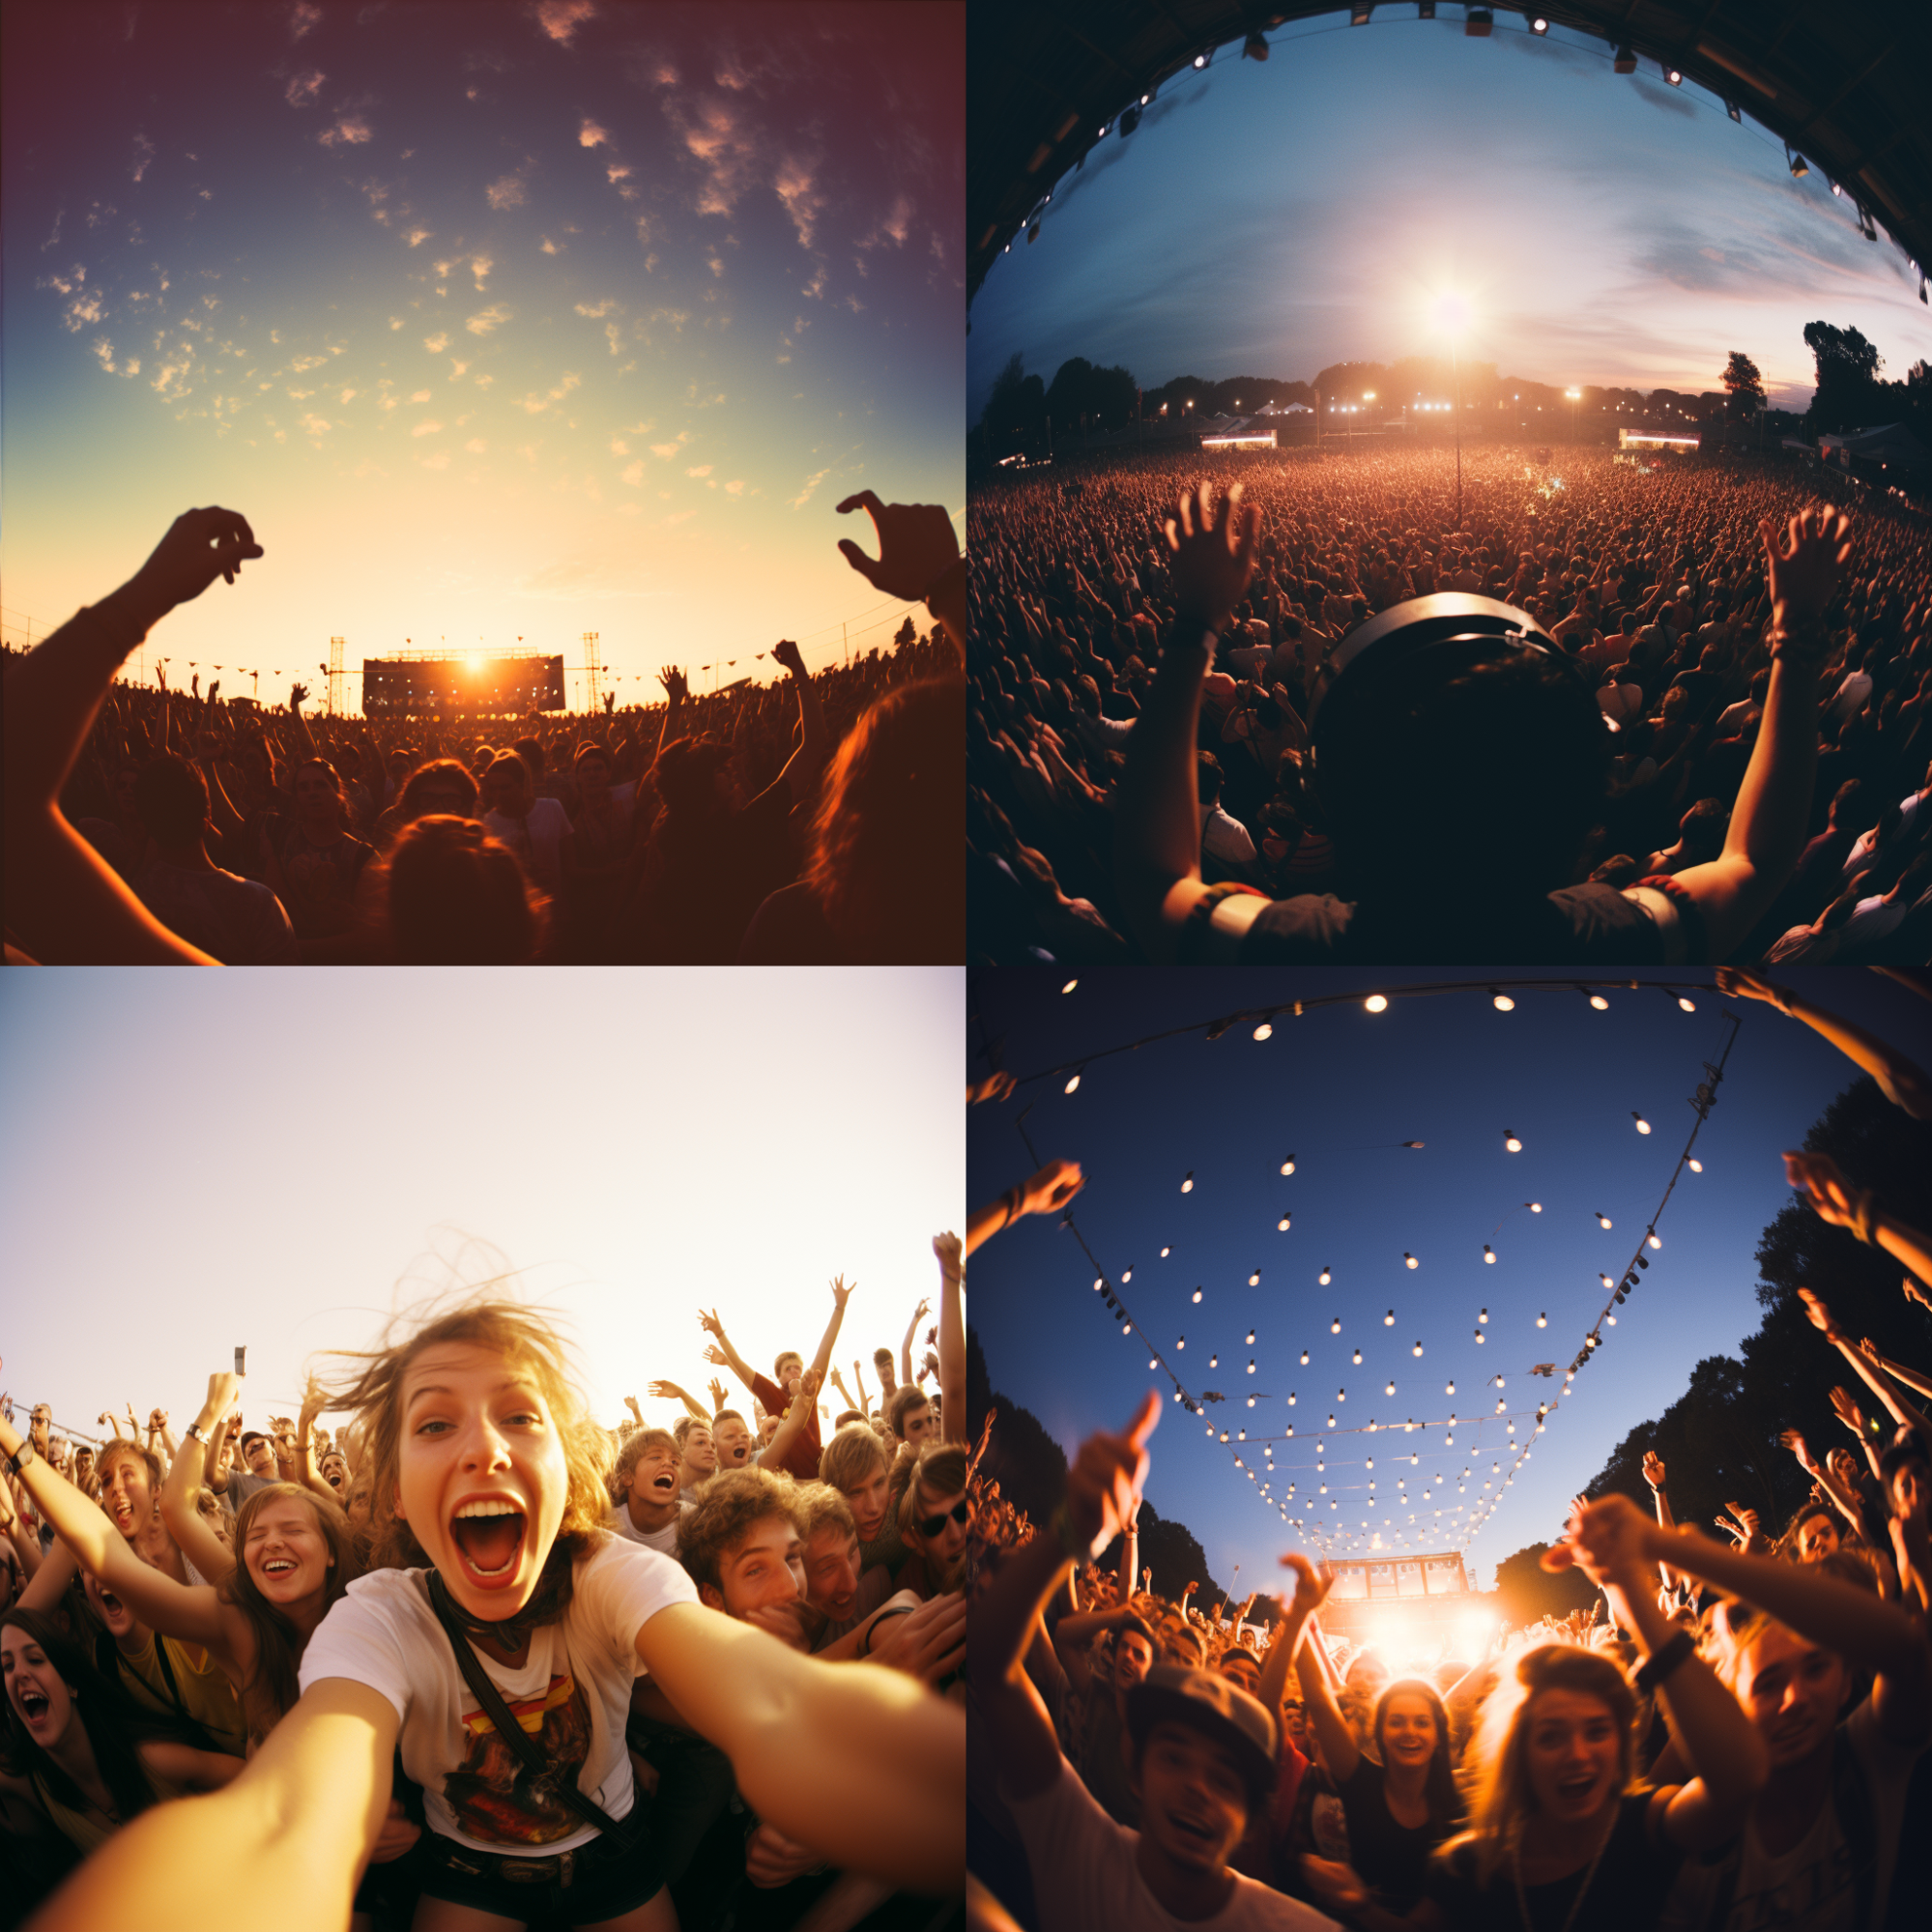 Four image options generated by Midjourney based on a festival vibes prompt